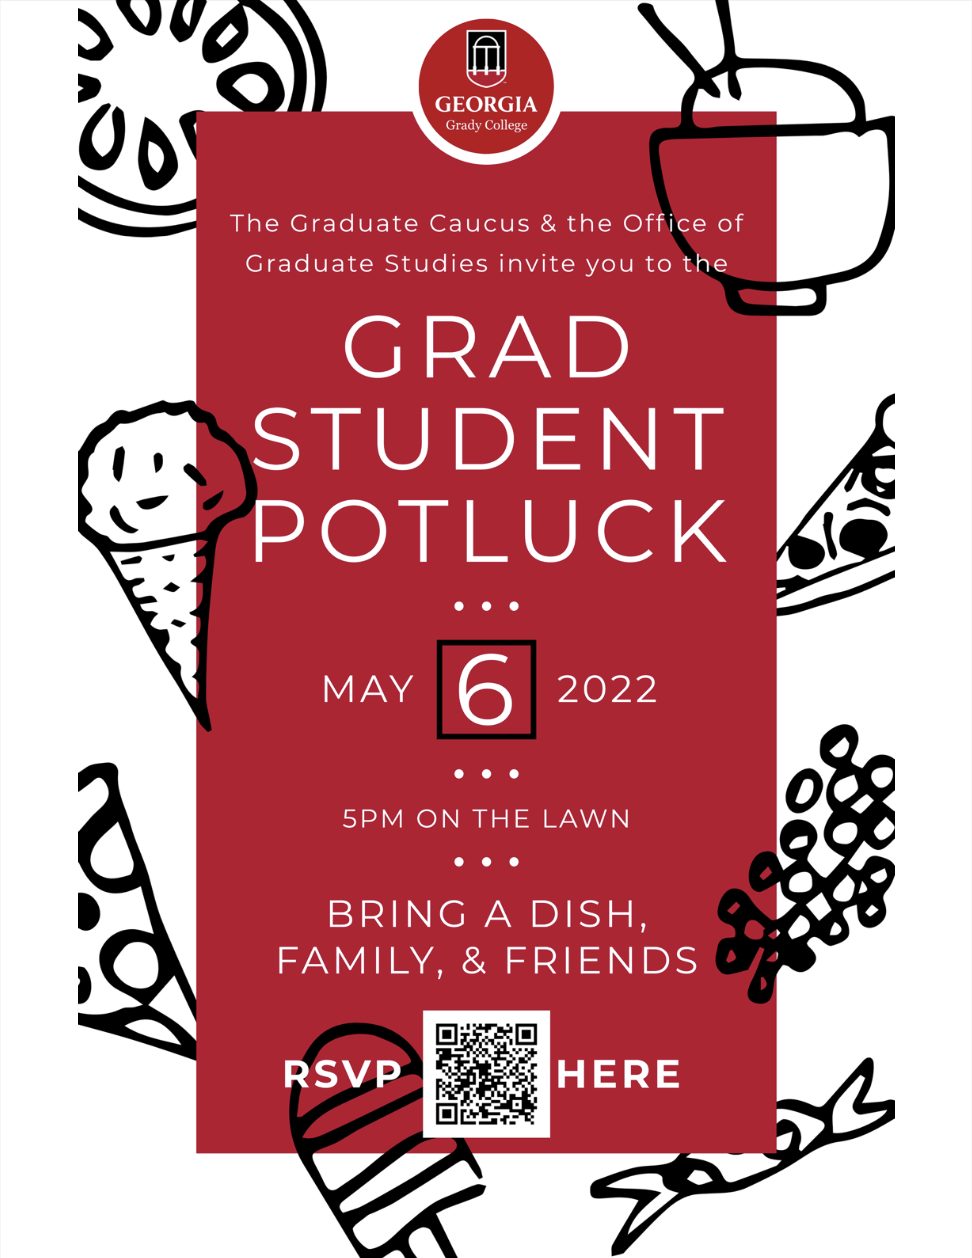 Flyer for the Grad Student Potluck.